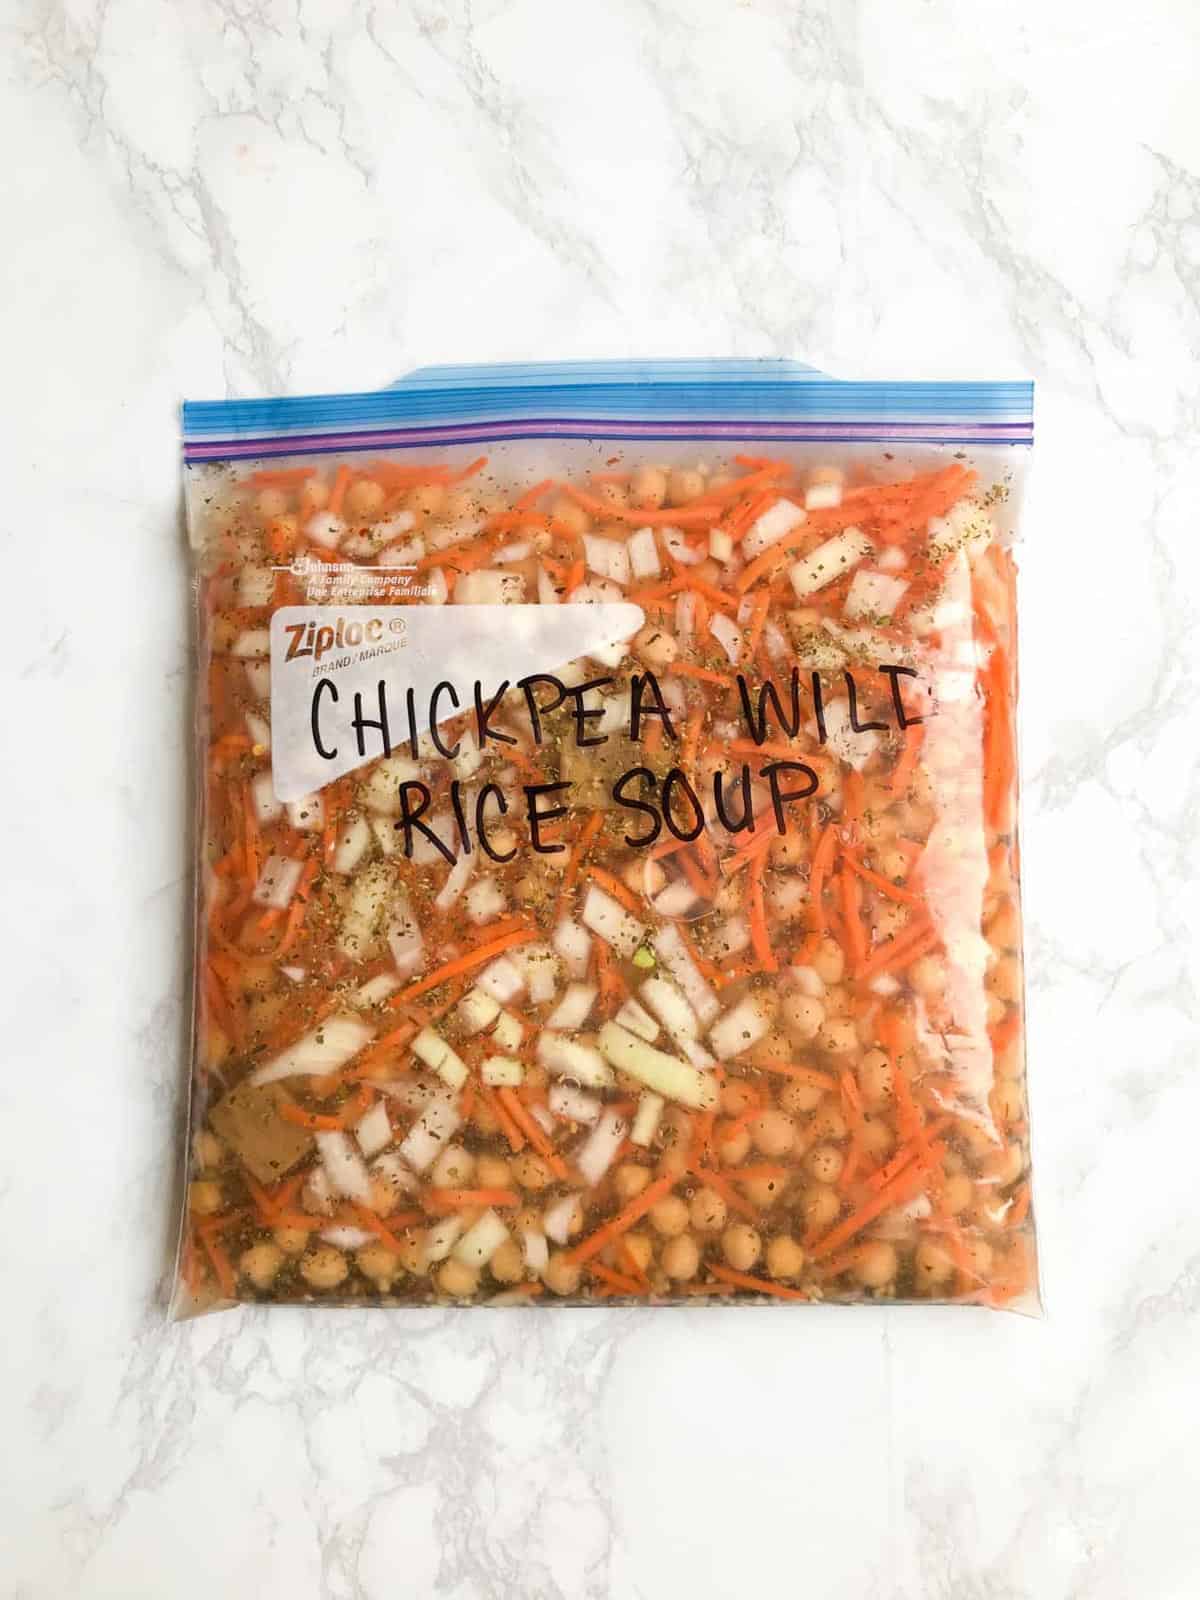 Chickpea Wild Rice Soup in a freezer bag